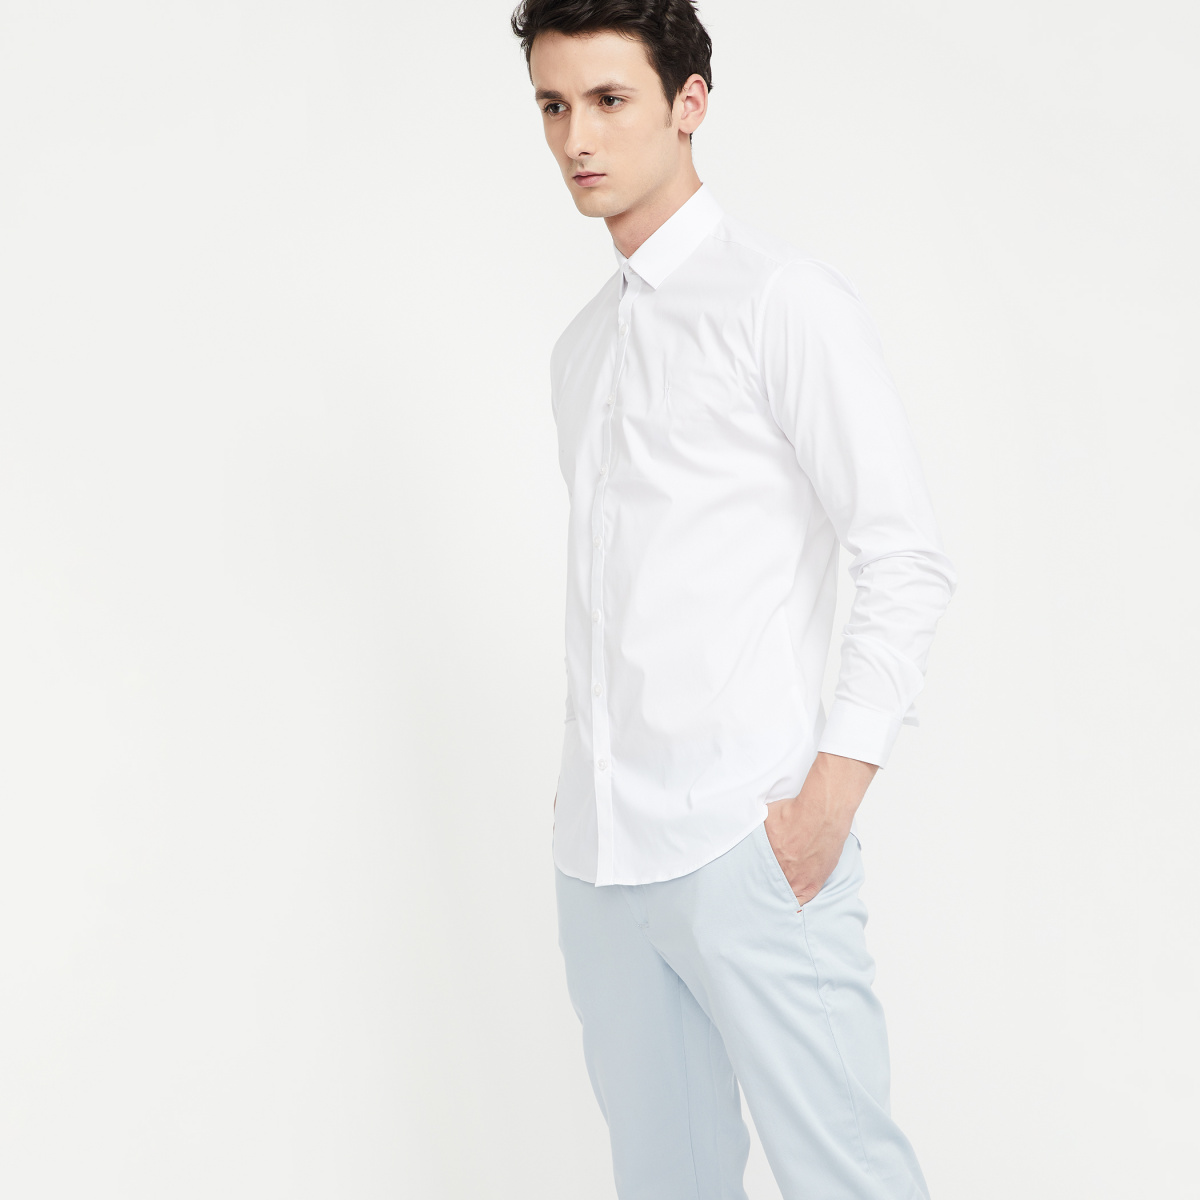 V DOT Solid Skinny Fit Casual Shirt